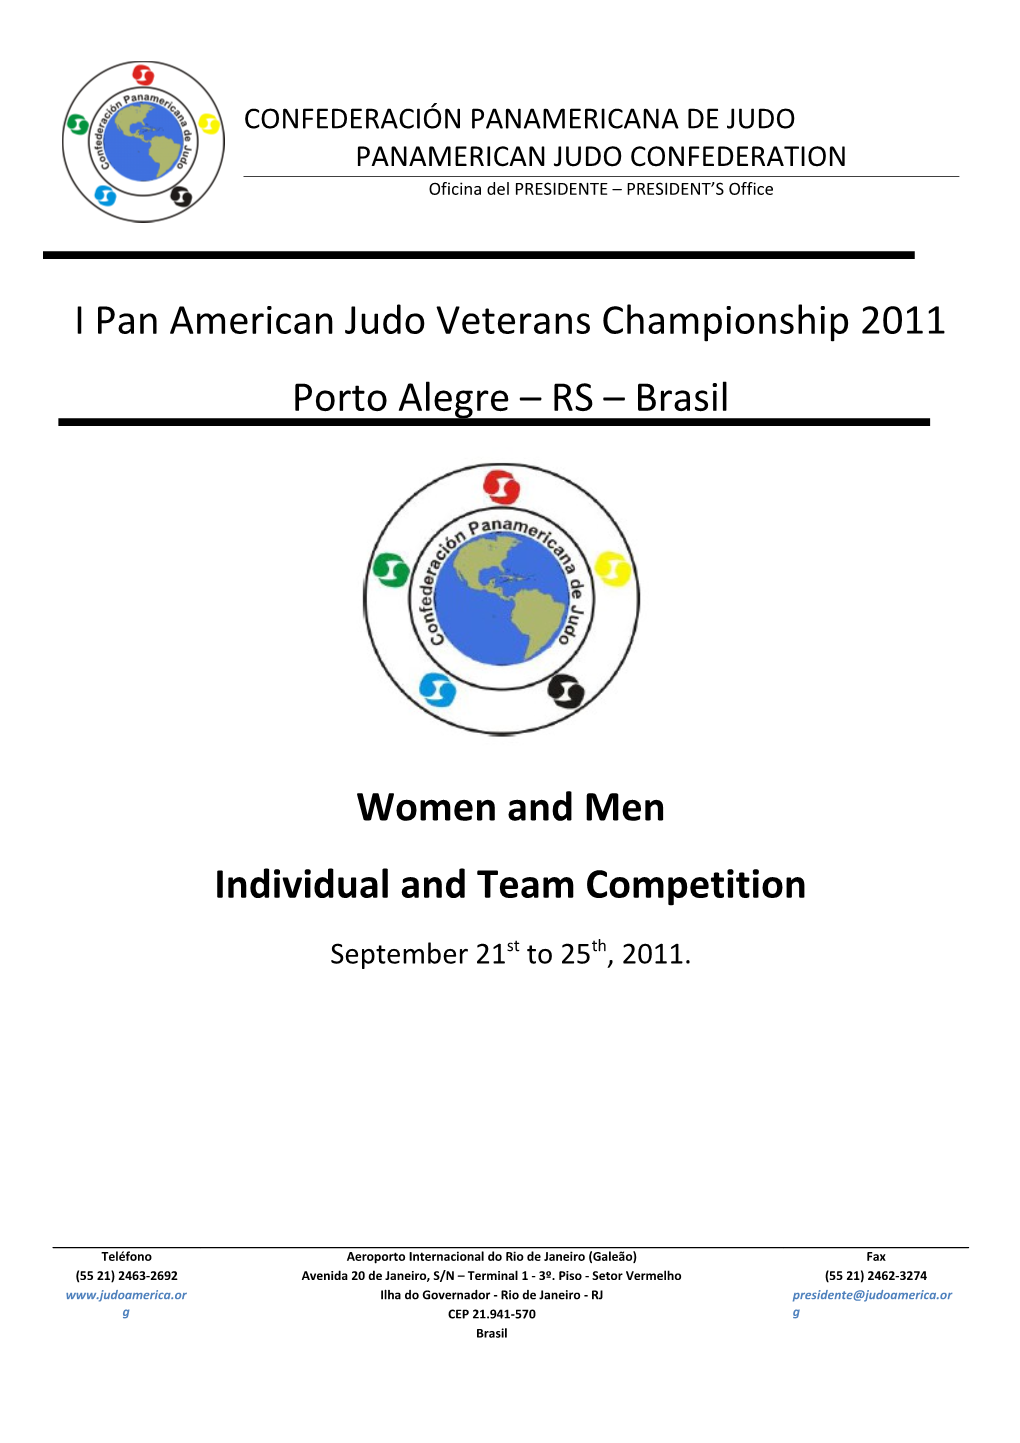 Individual and Team Competition